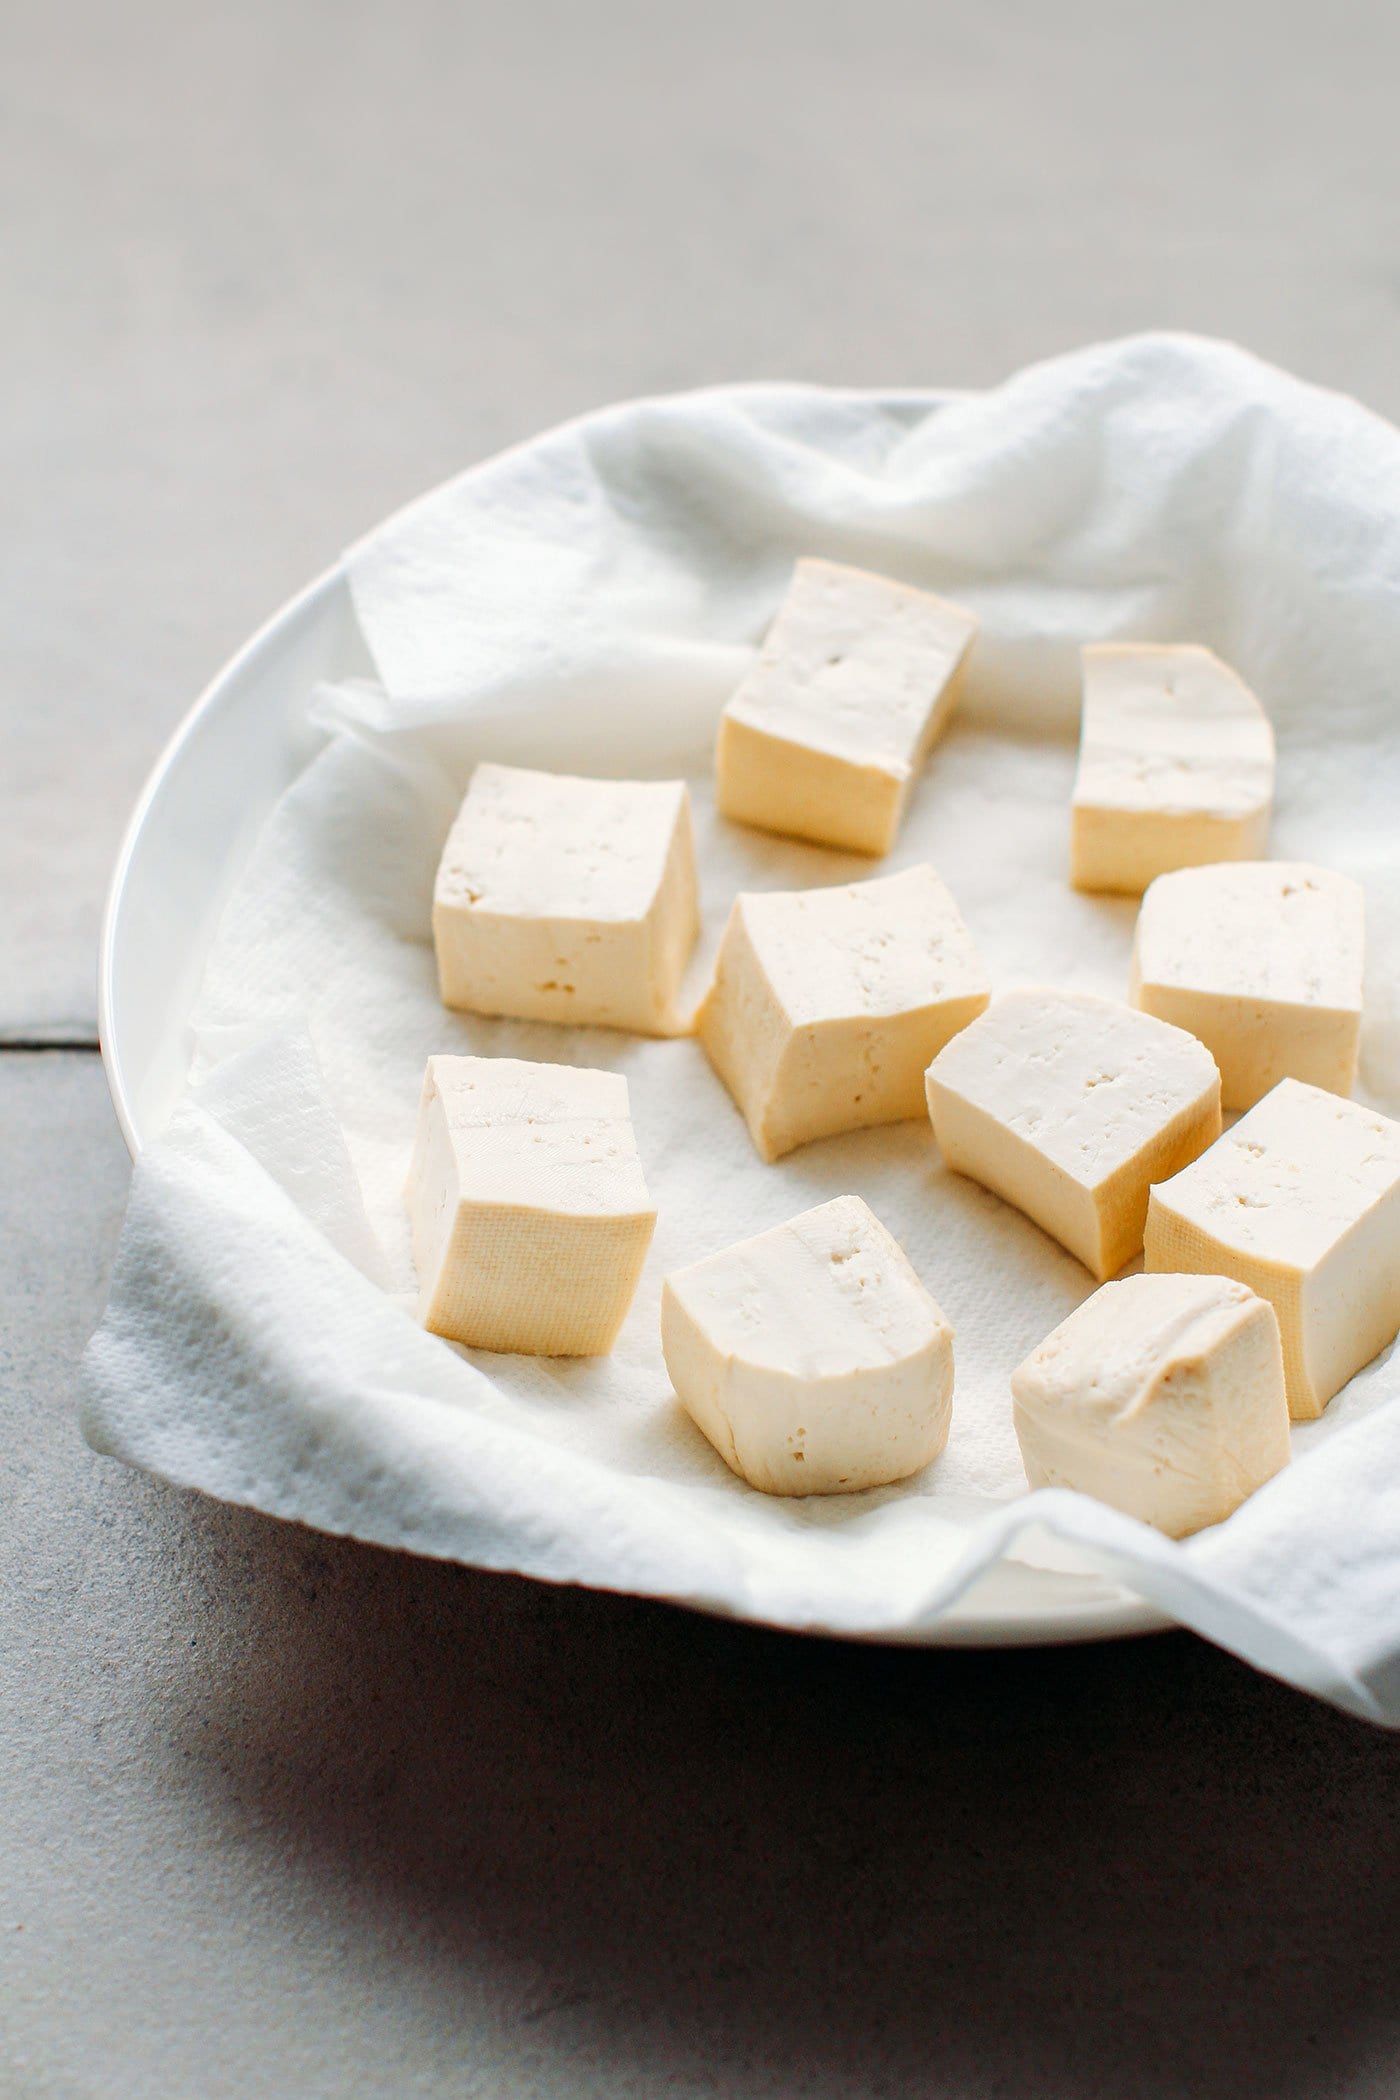 Tofu cubes on a plate with kitchen paper towel.